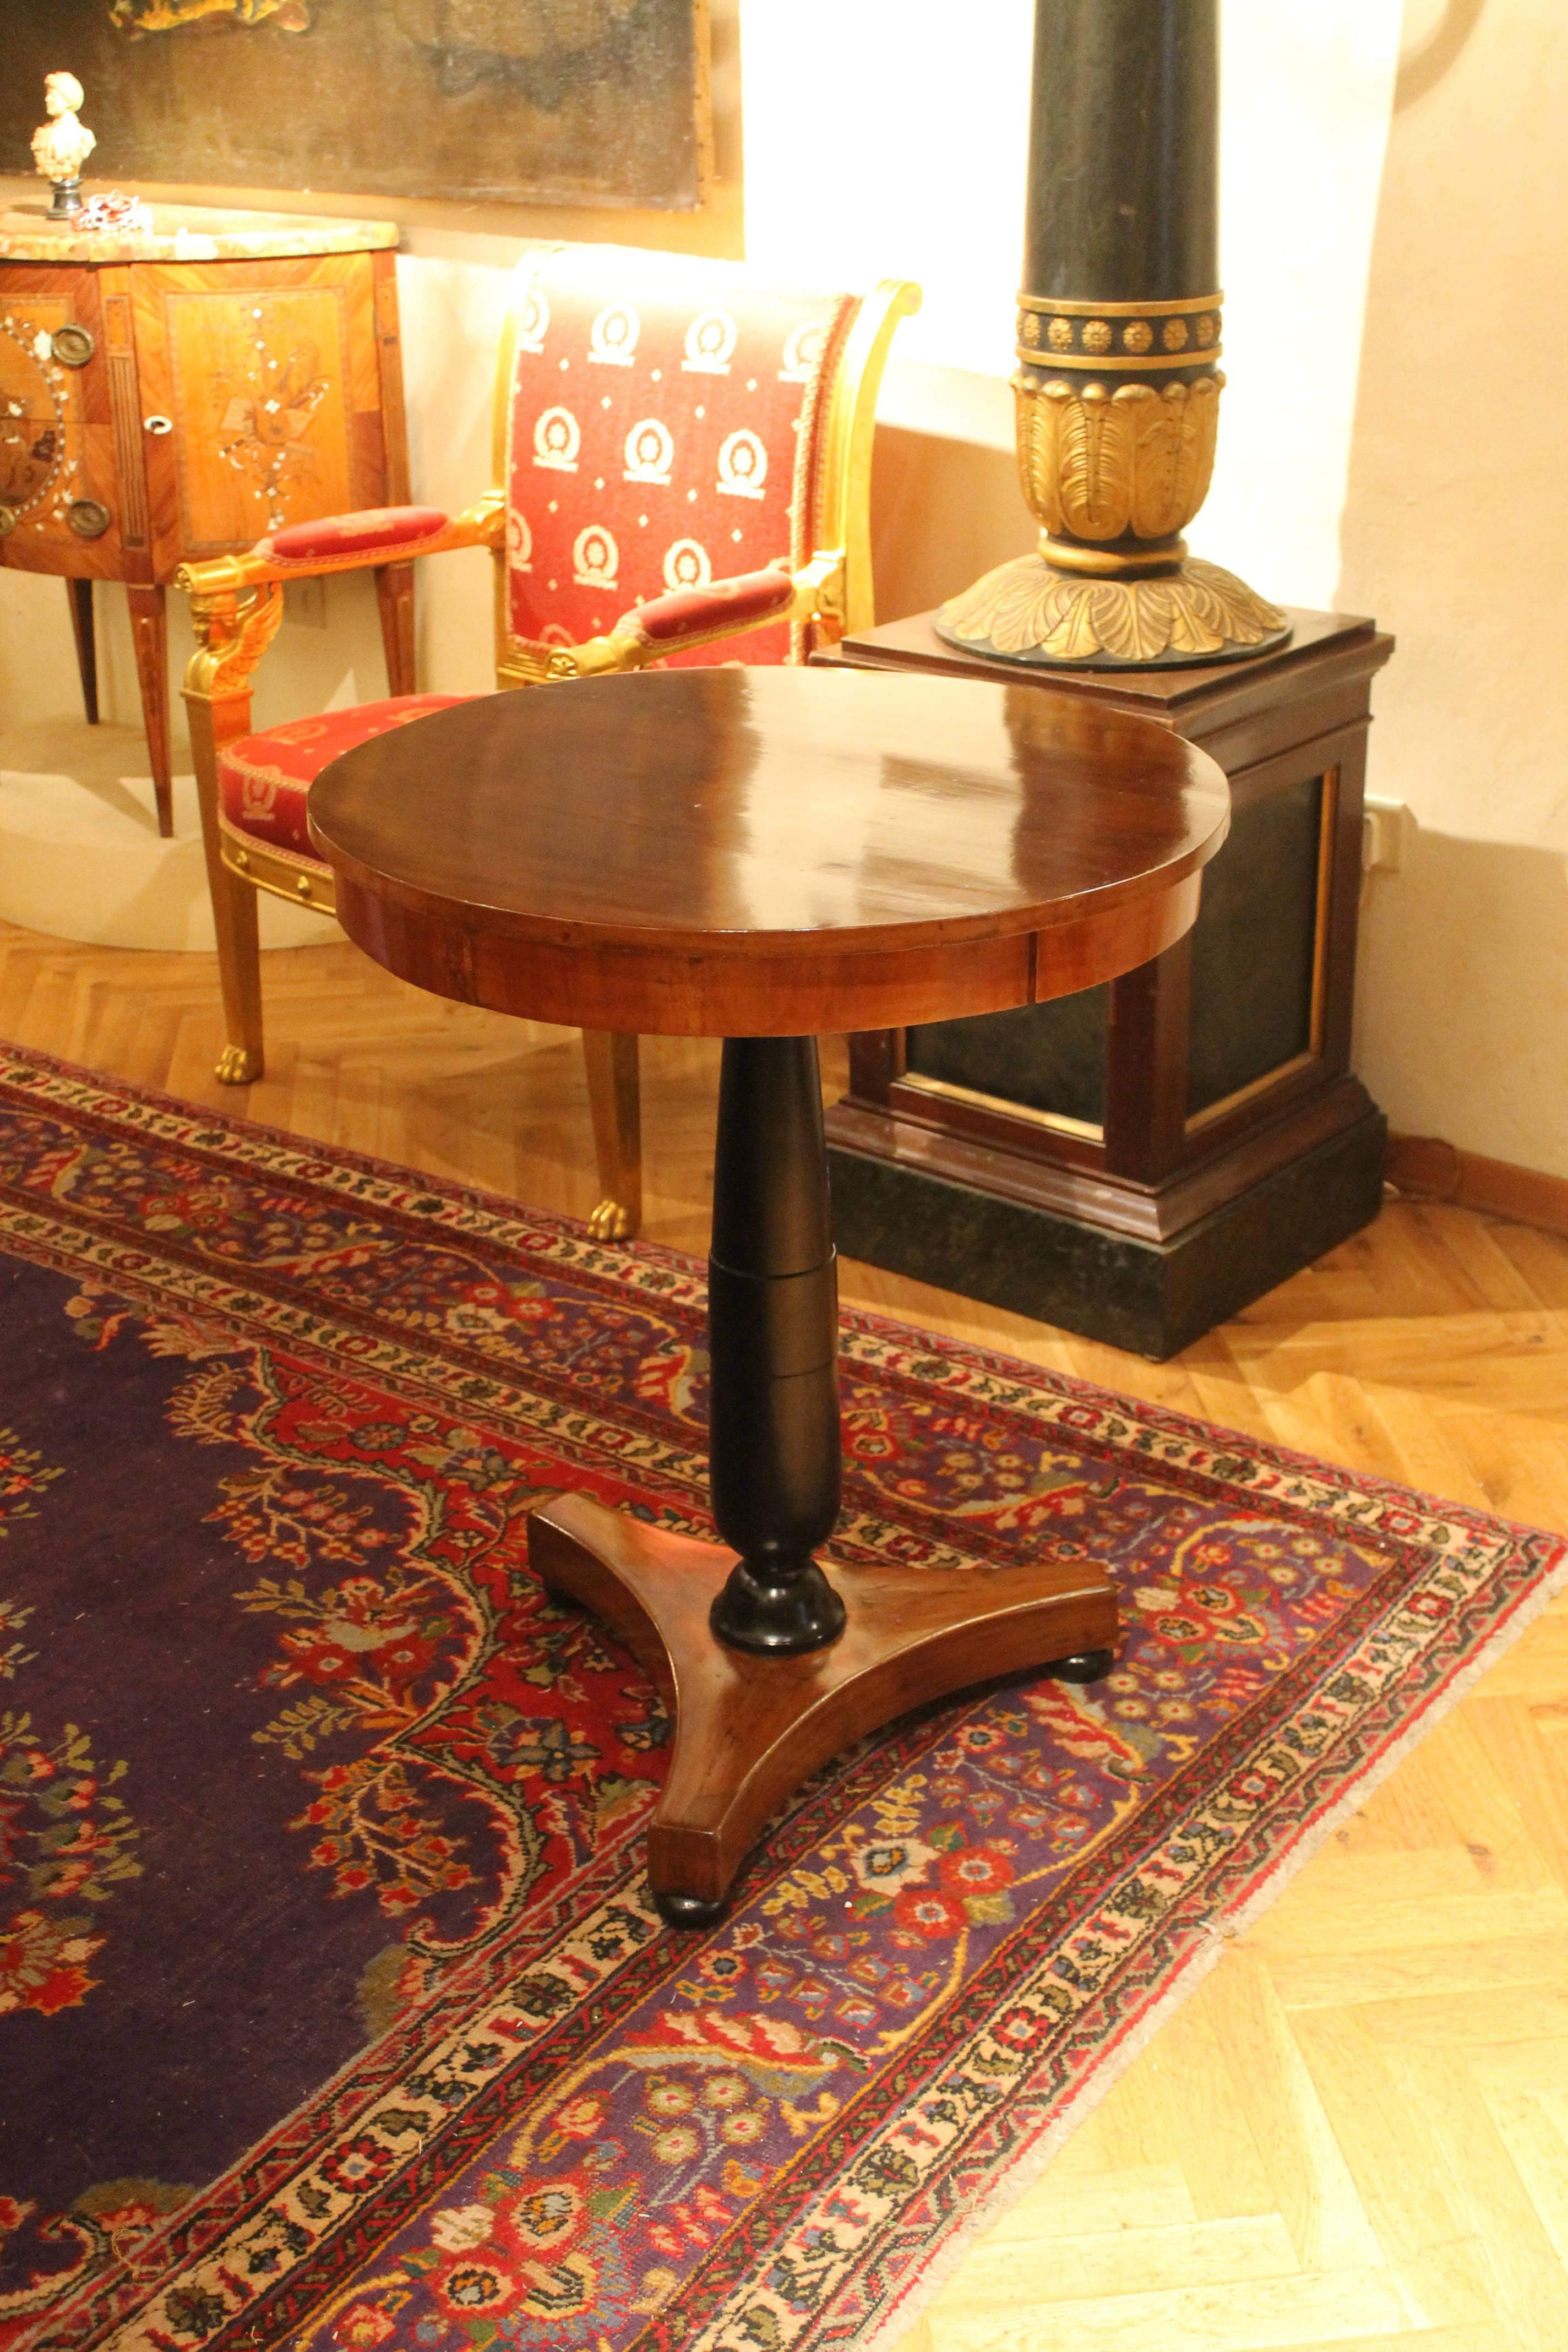 This beautiful antique early 19th century Italian Empire circular centre table in blonde flamed walnut wood and black ebonized wood comes from a villa in Tuscan countryside. This is a very good quality side table with circular top sitting above a